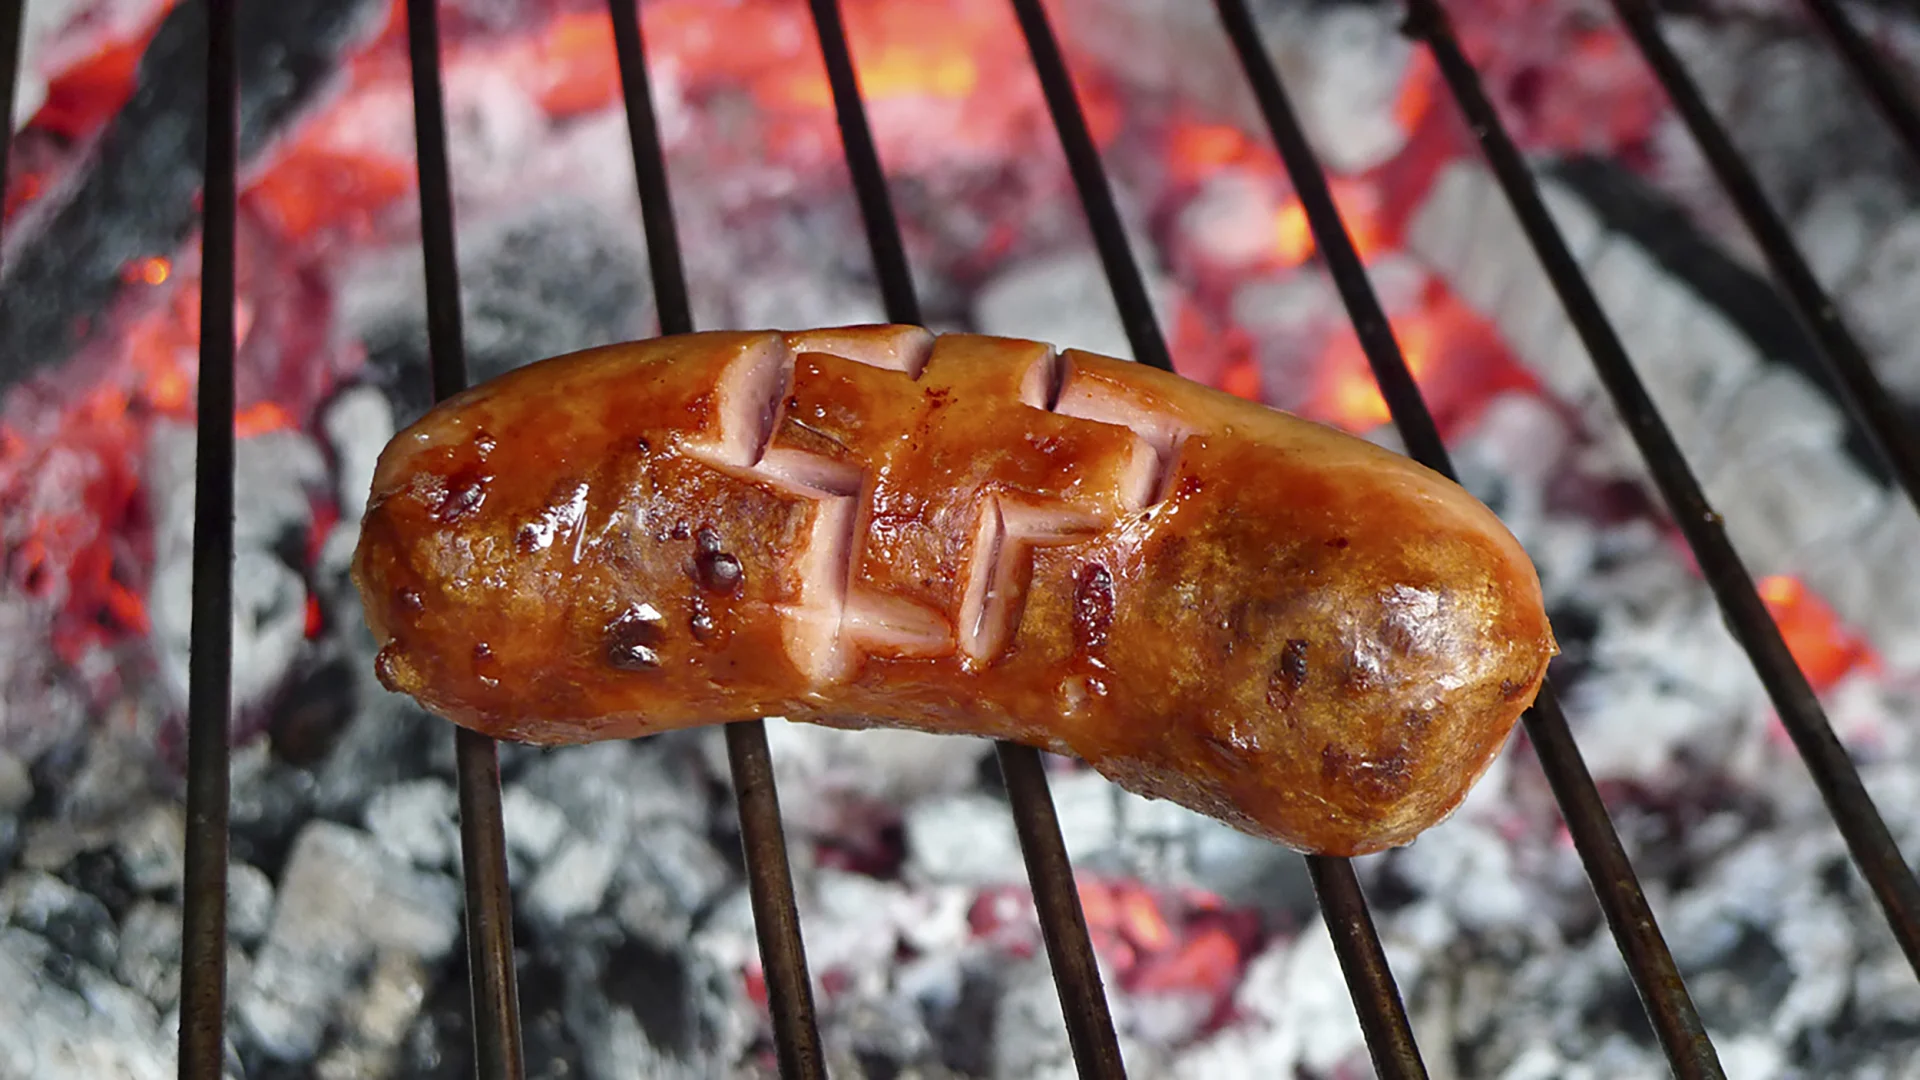 A cervelat sausage on a charcoal barbecue grill.